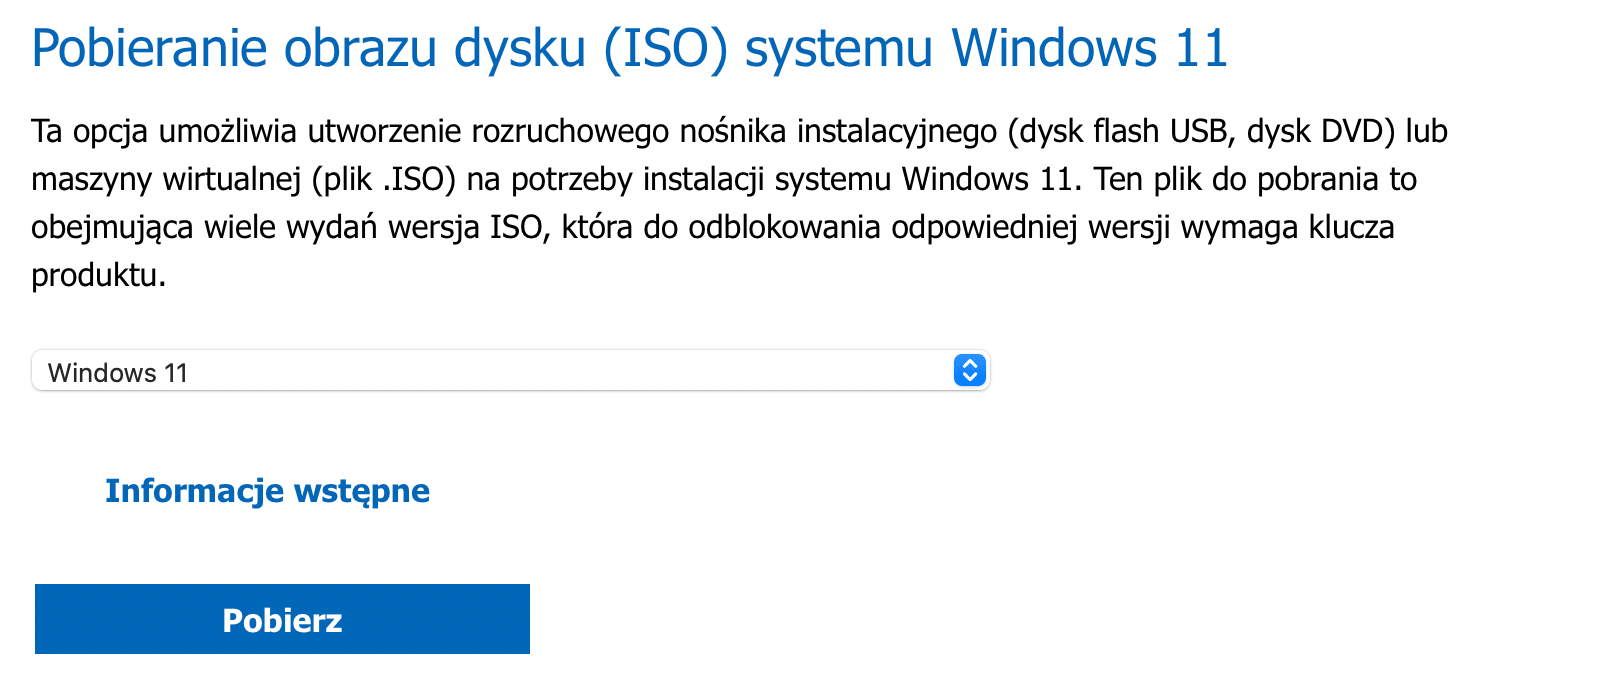 Downloading the Windows 11 disk image (ISO)